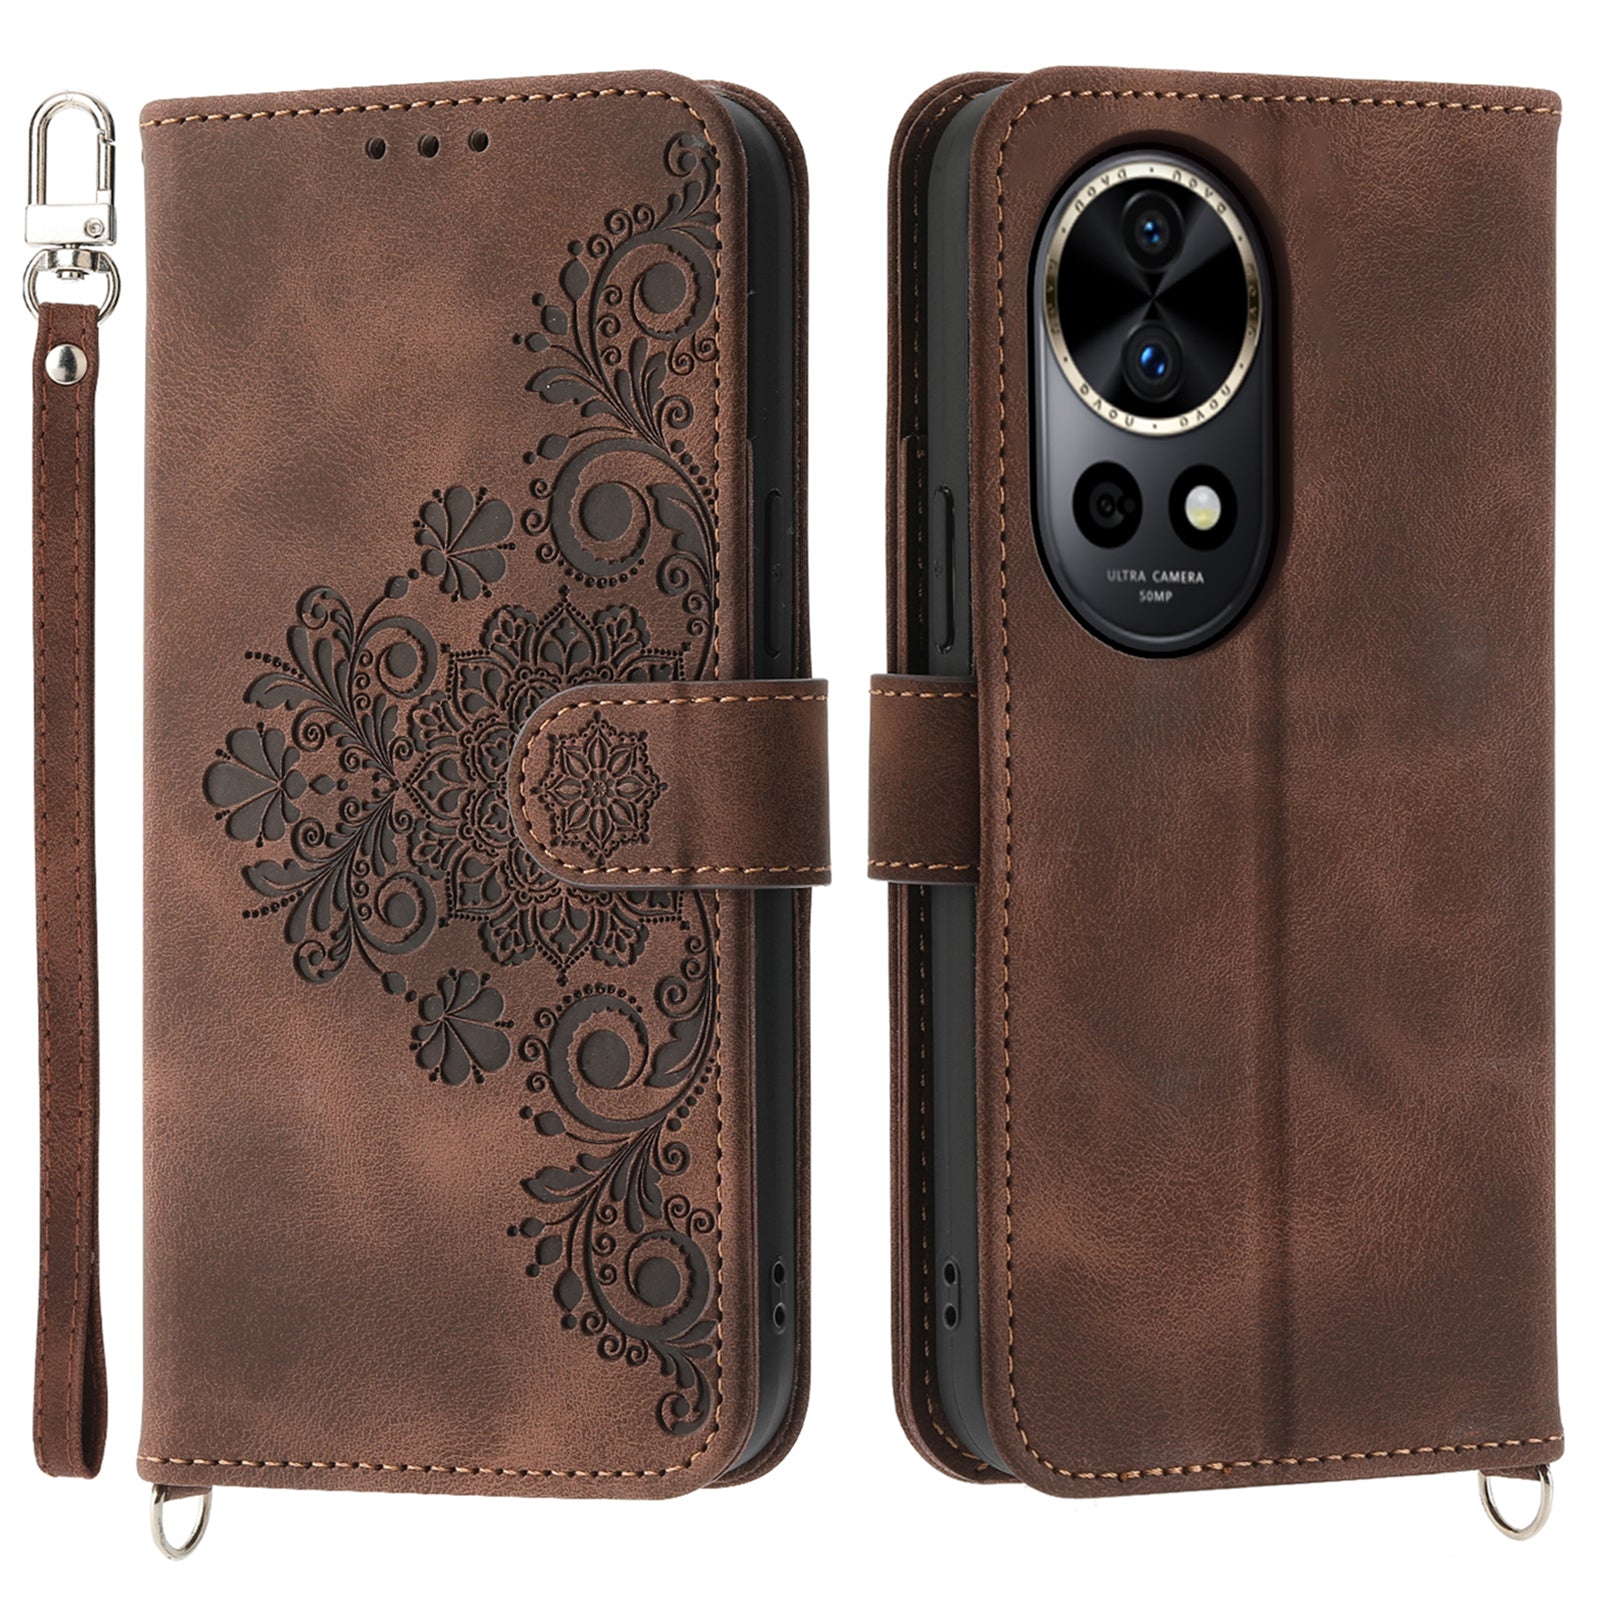 For Huawei nova 12 Pro 5G / nova 12 Ultra 5G Case Flower Wallet Leather Cover Mobile Accessories Wholesale Supplier - Brown